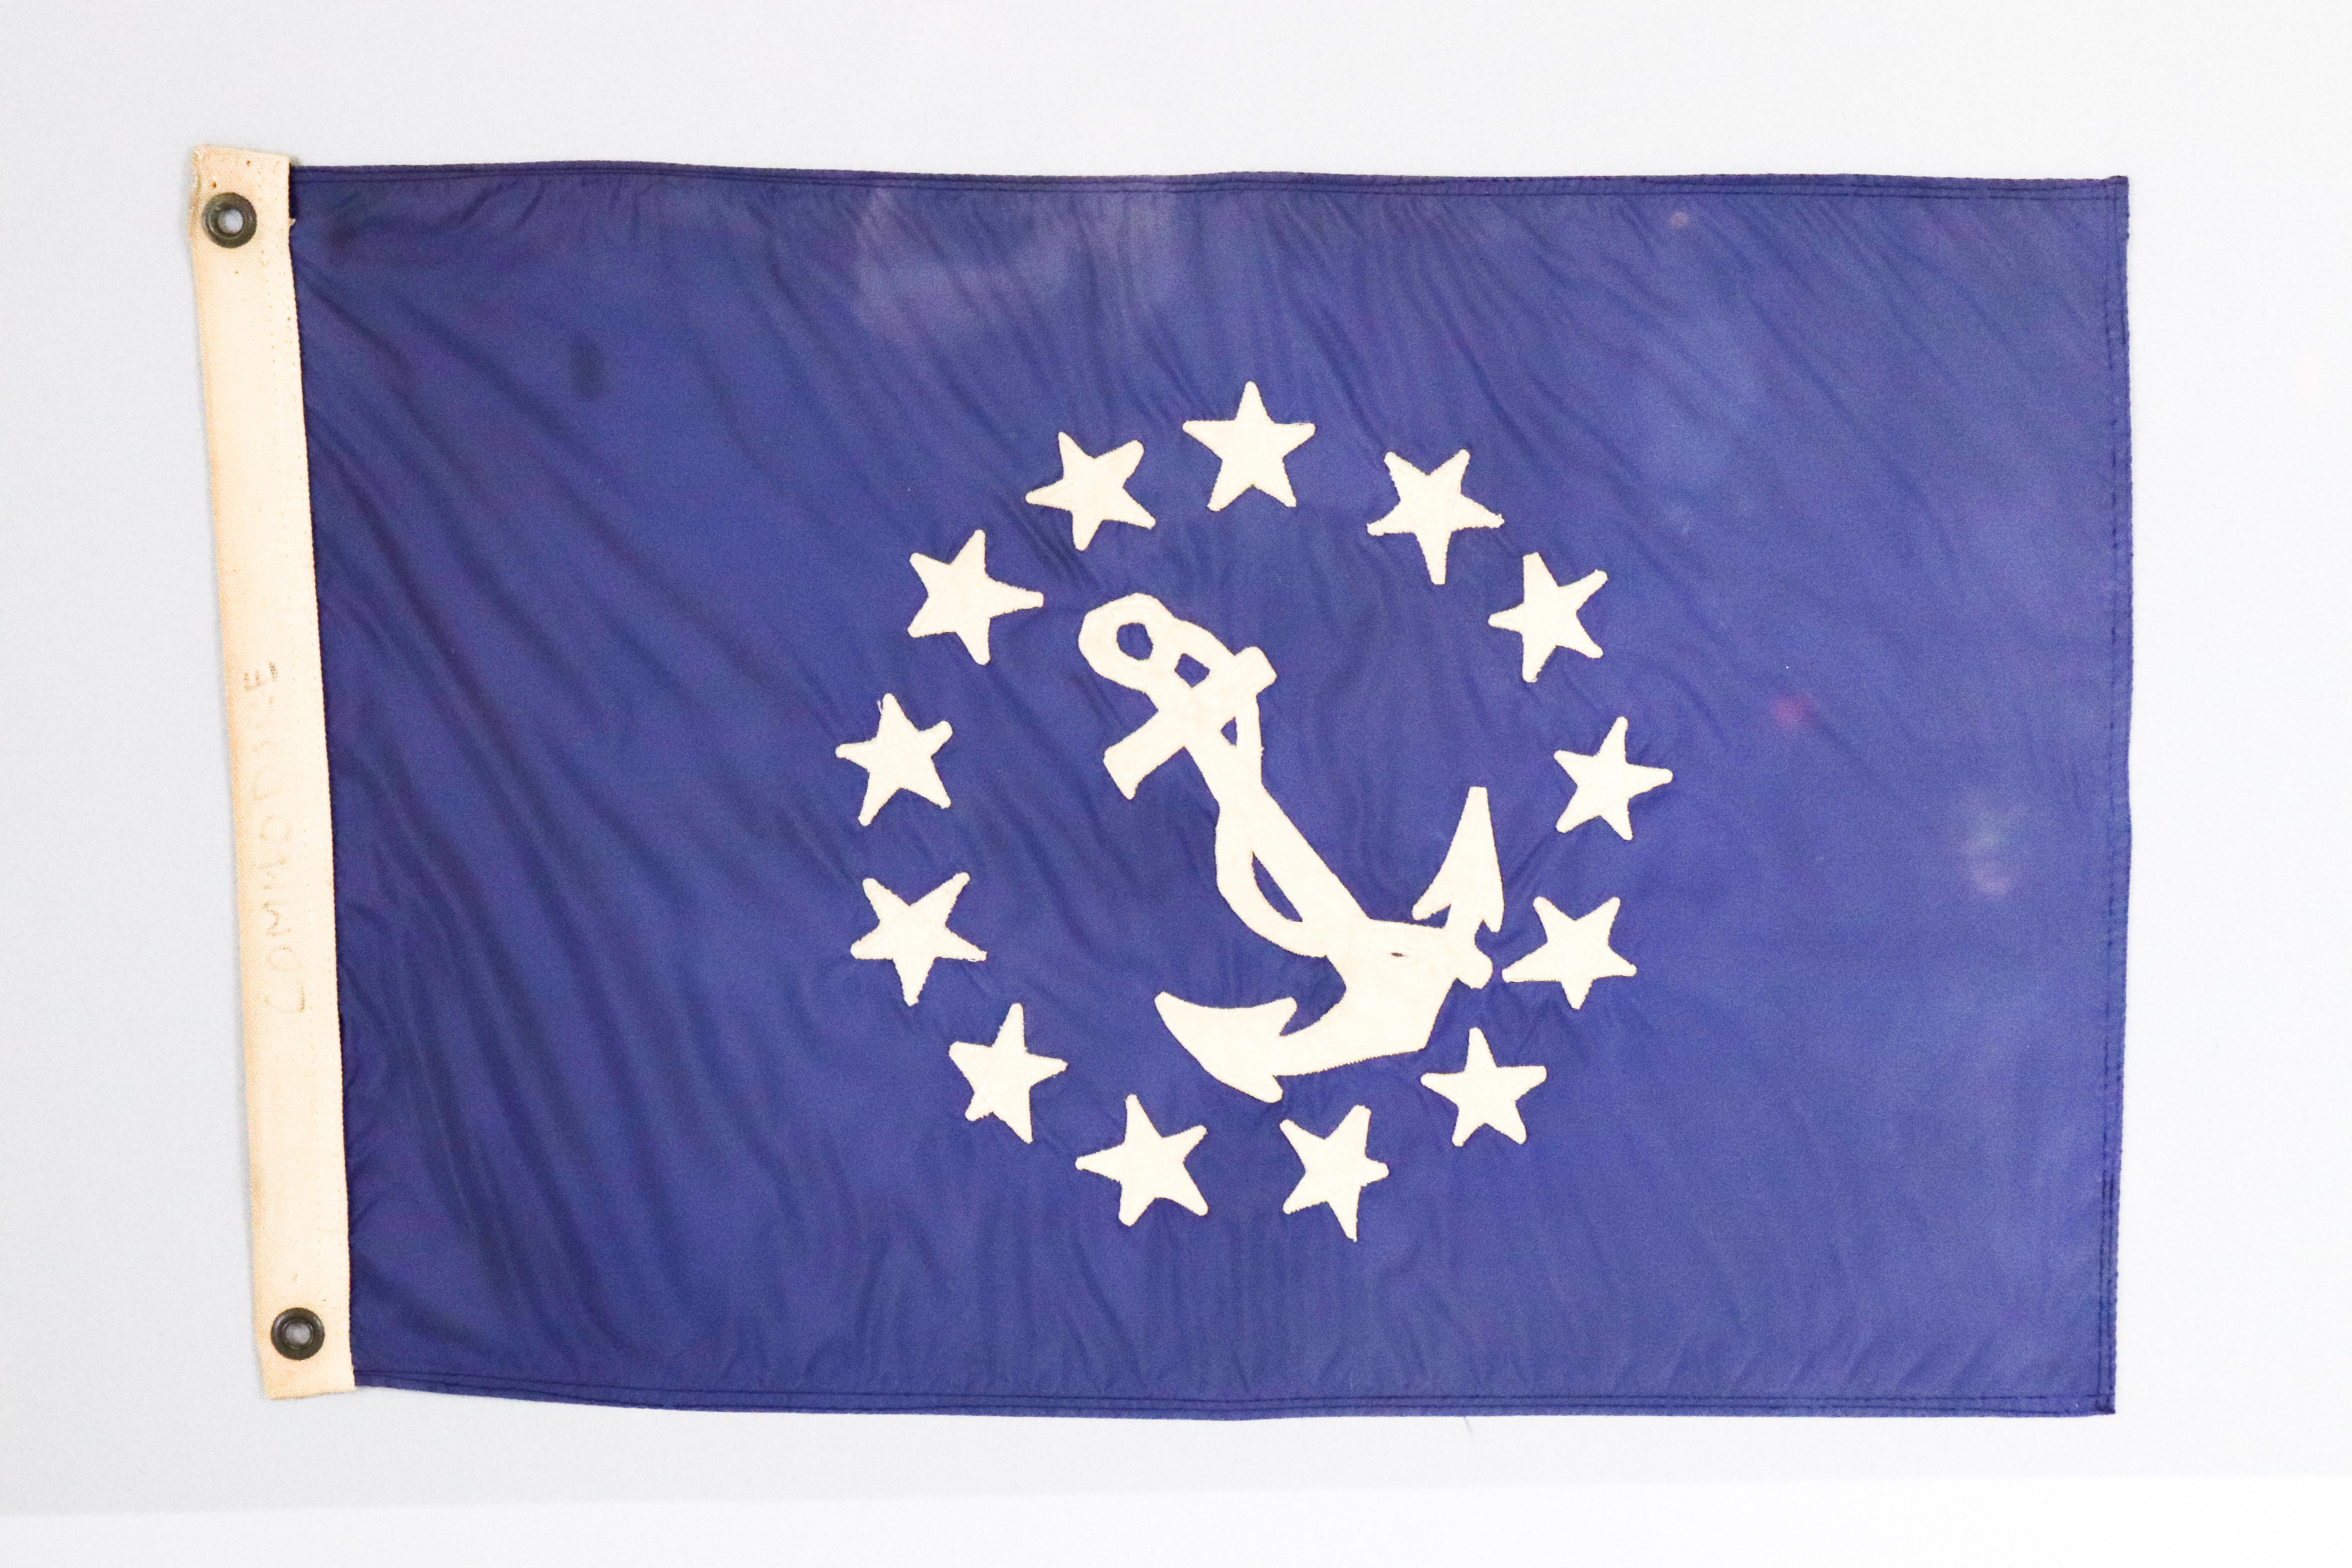 Yacht club Commodore's flag. Blue field surrounded by thirteen white stars. With cotton hoist and bras grommets. Mounted on gray matting and framed. Measures: 24